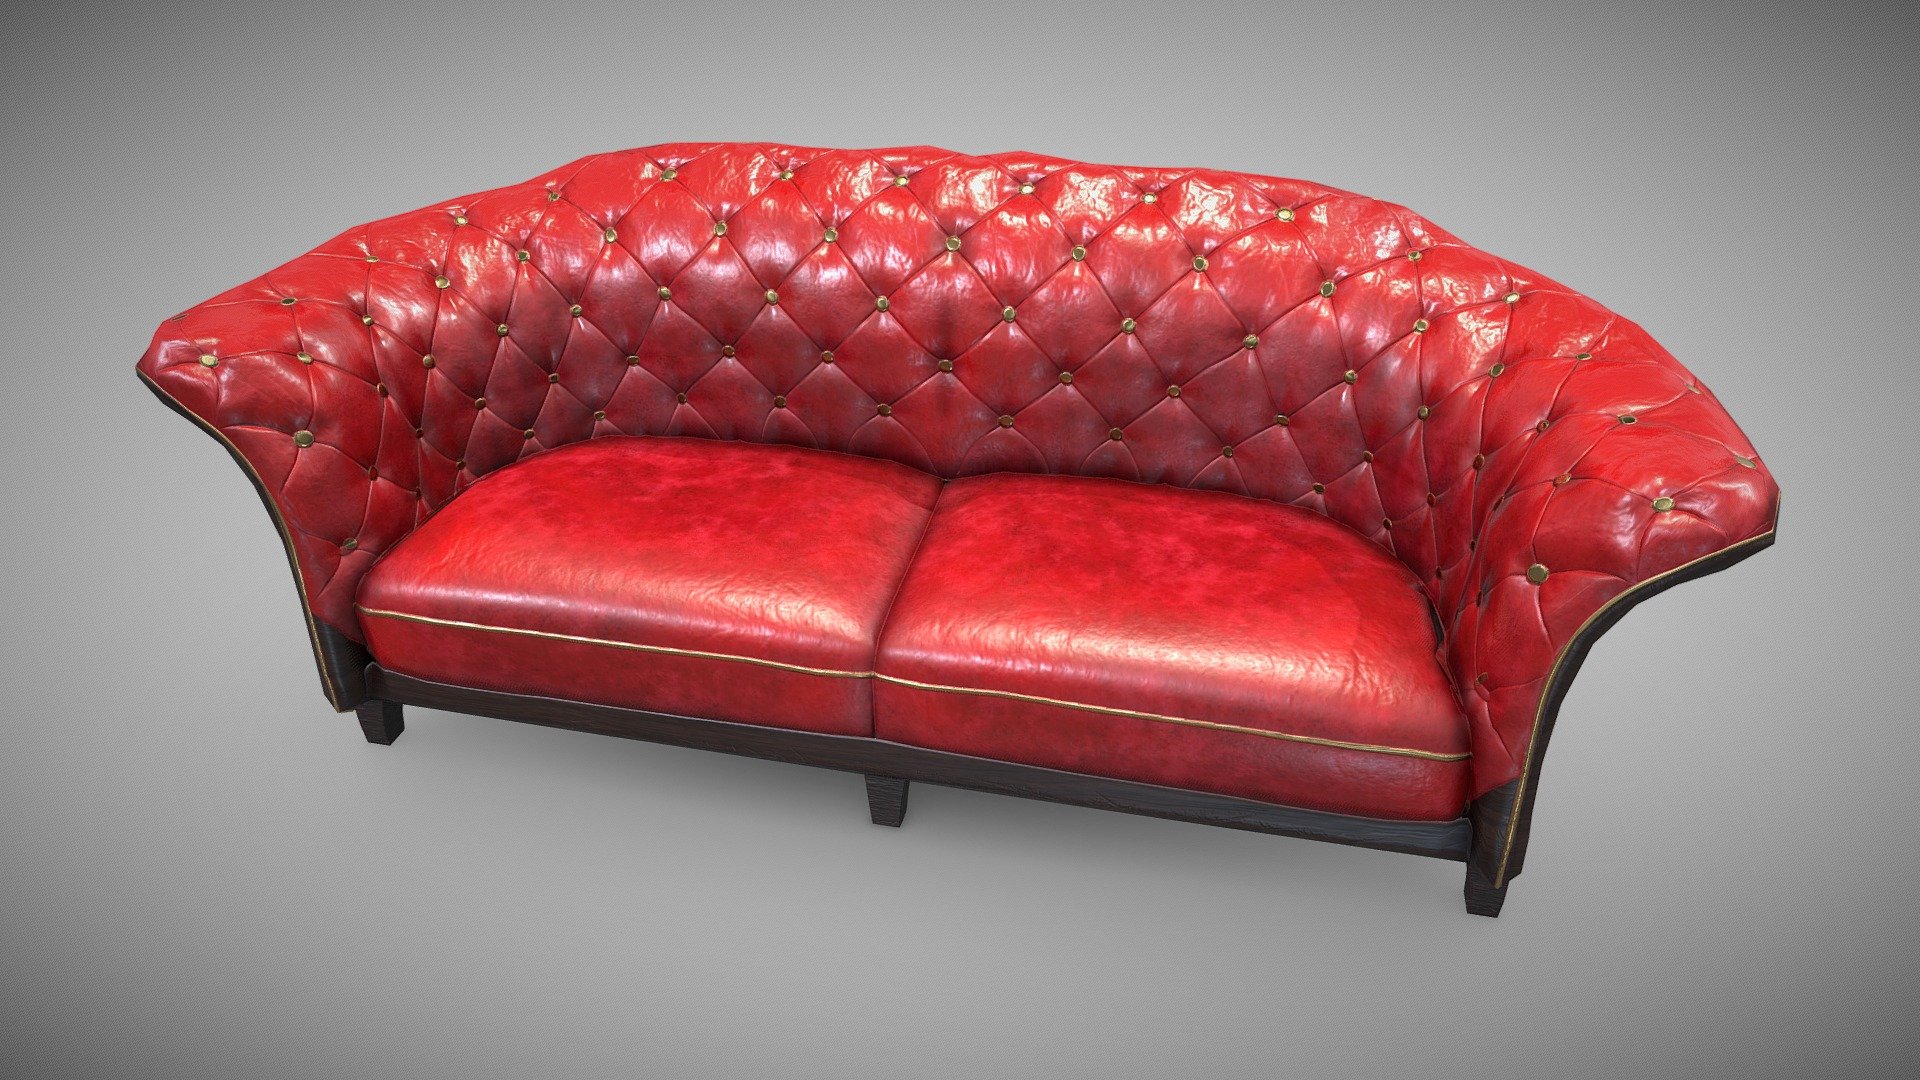 Old red sofa with chesterfield pattern.
All done in Maya (high &amp; low poly, chesterfield pattern included), then shading in Substance Painter 3d model